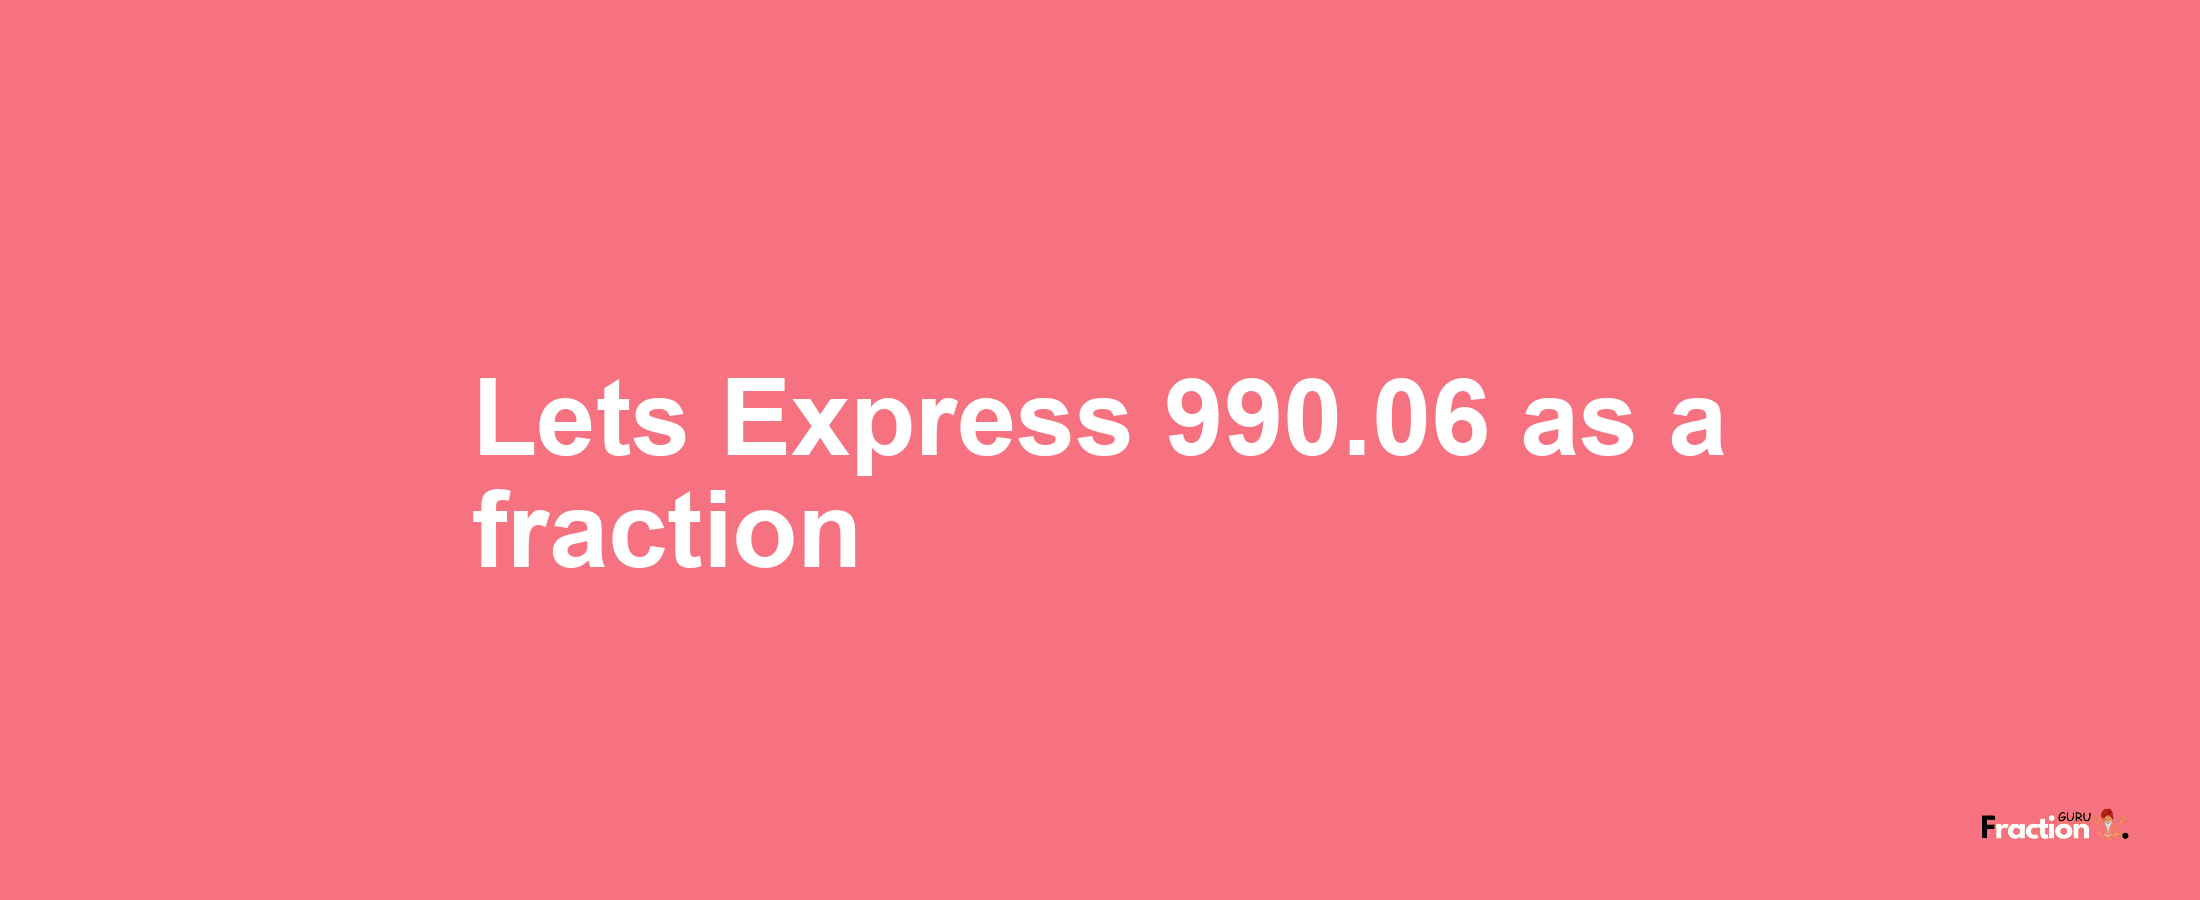 Lets Express 990.06 as afraction